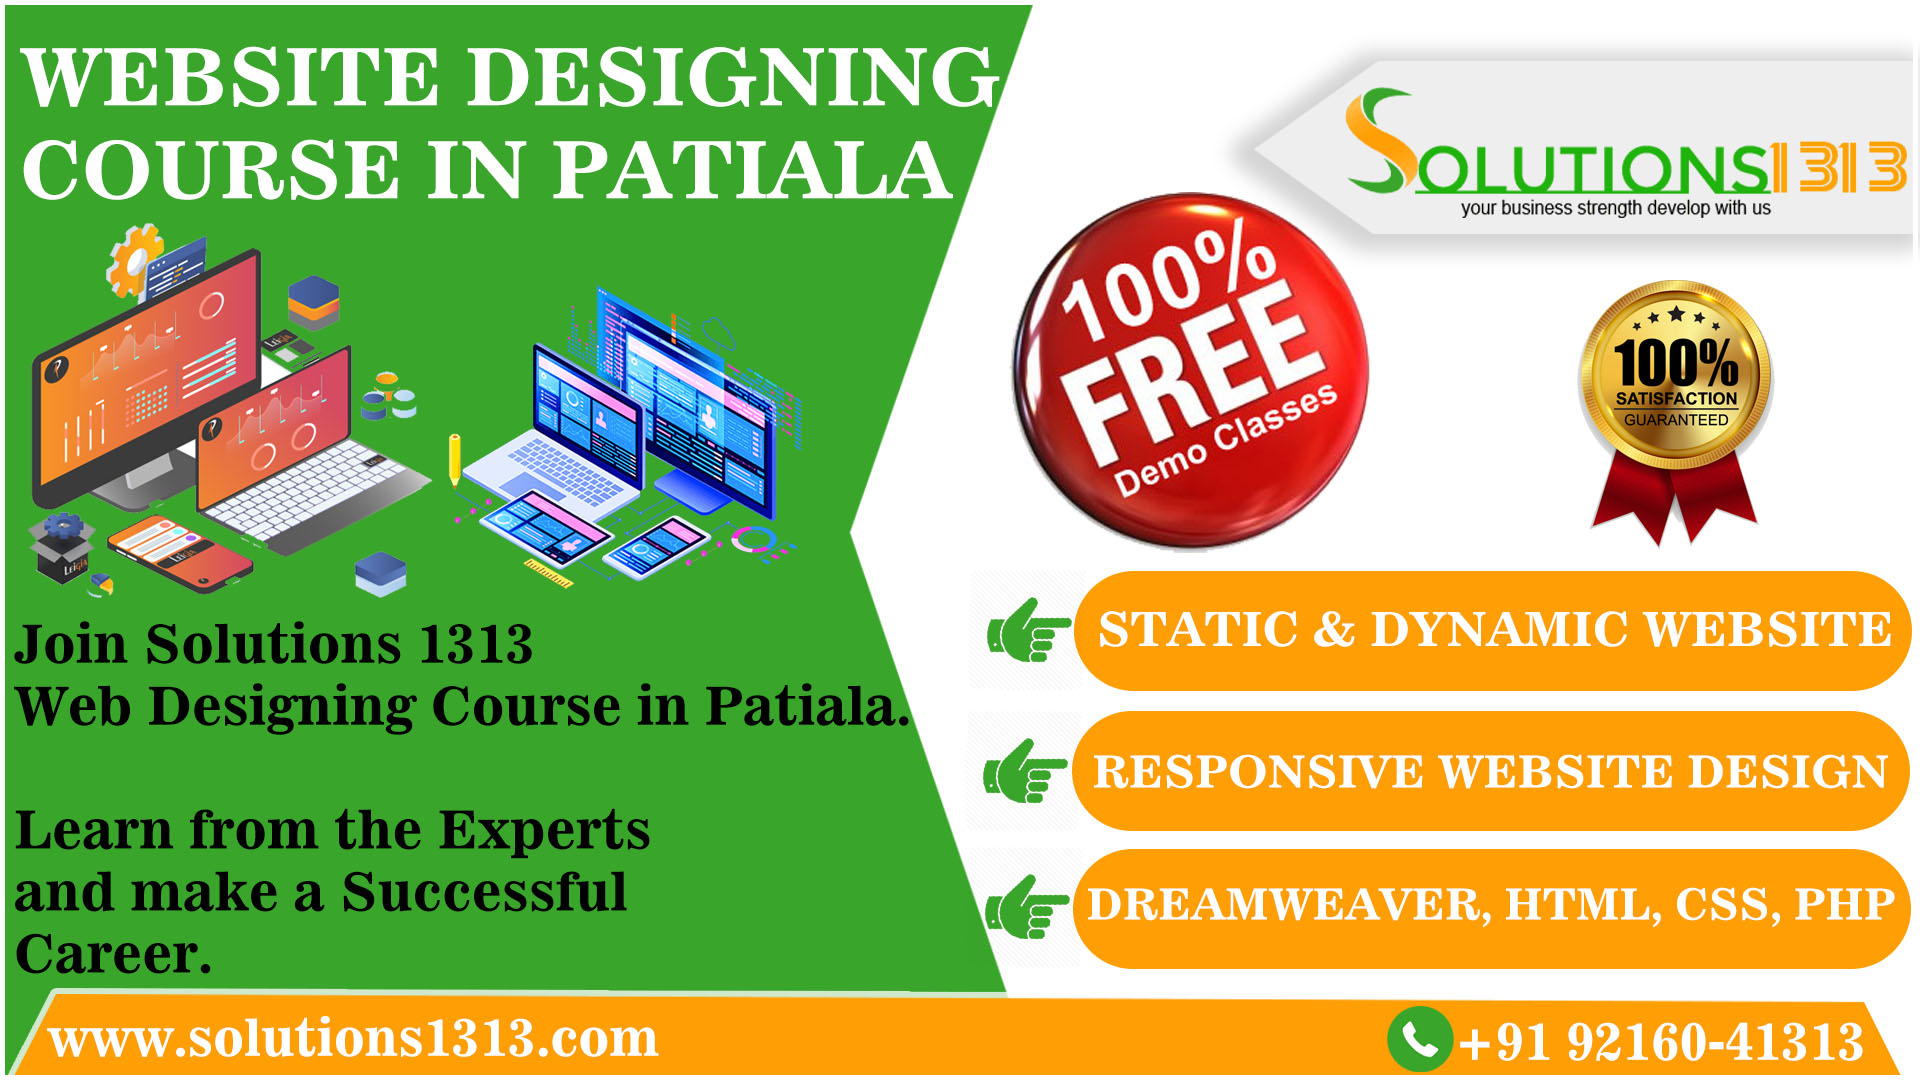 Web Designing Course in Patiala